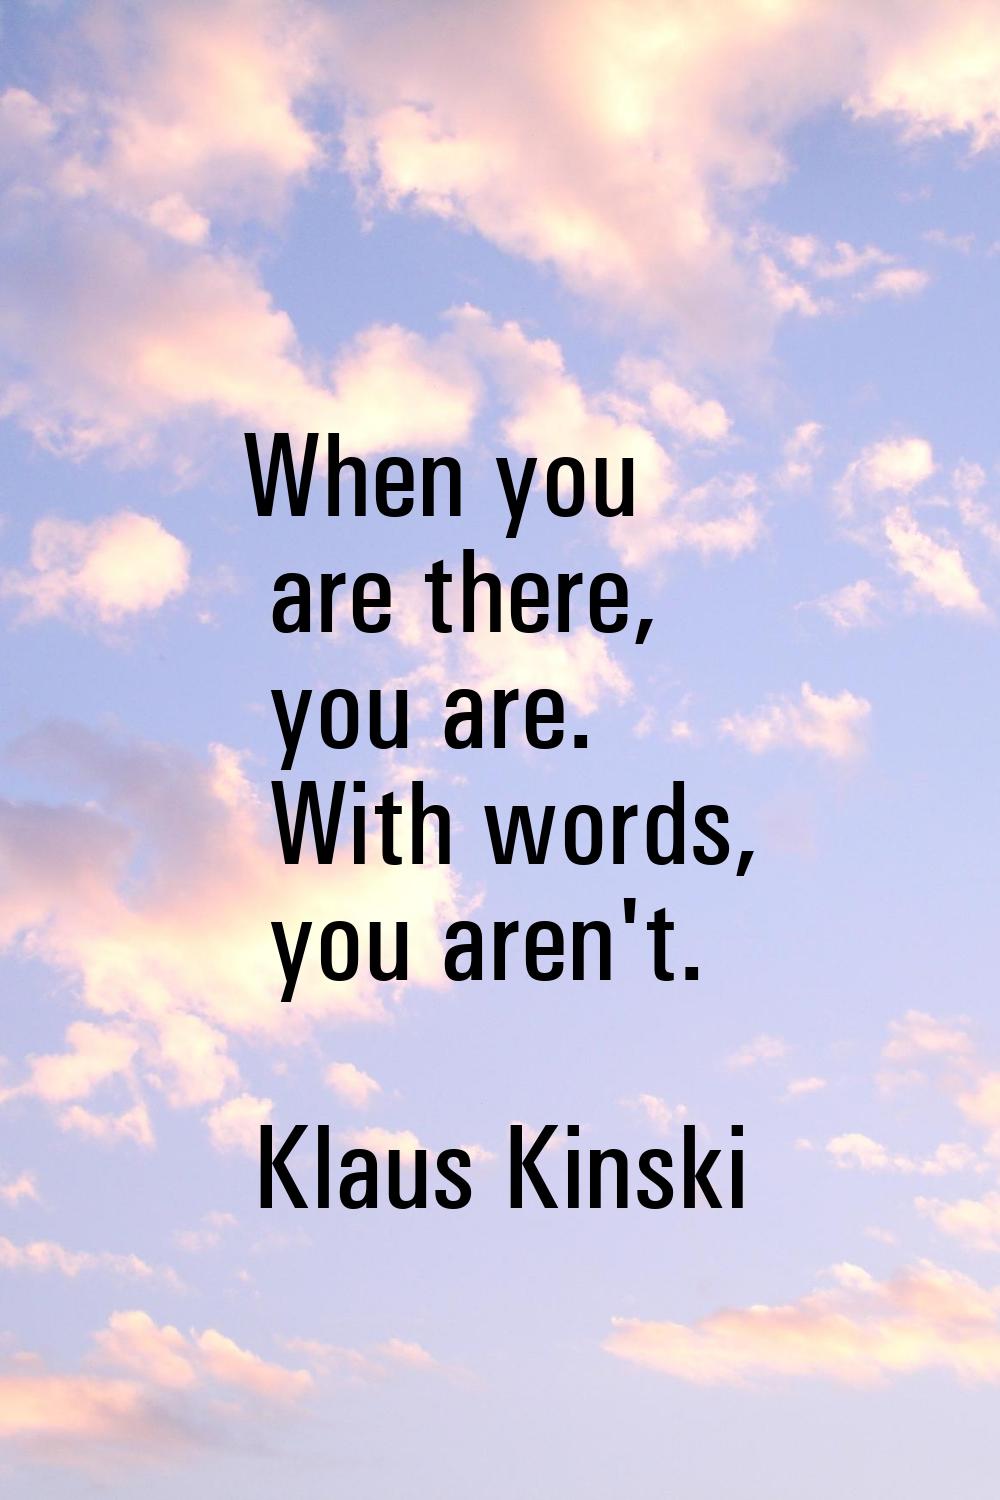 When you are there, you are. With words, you aren't.